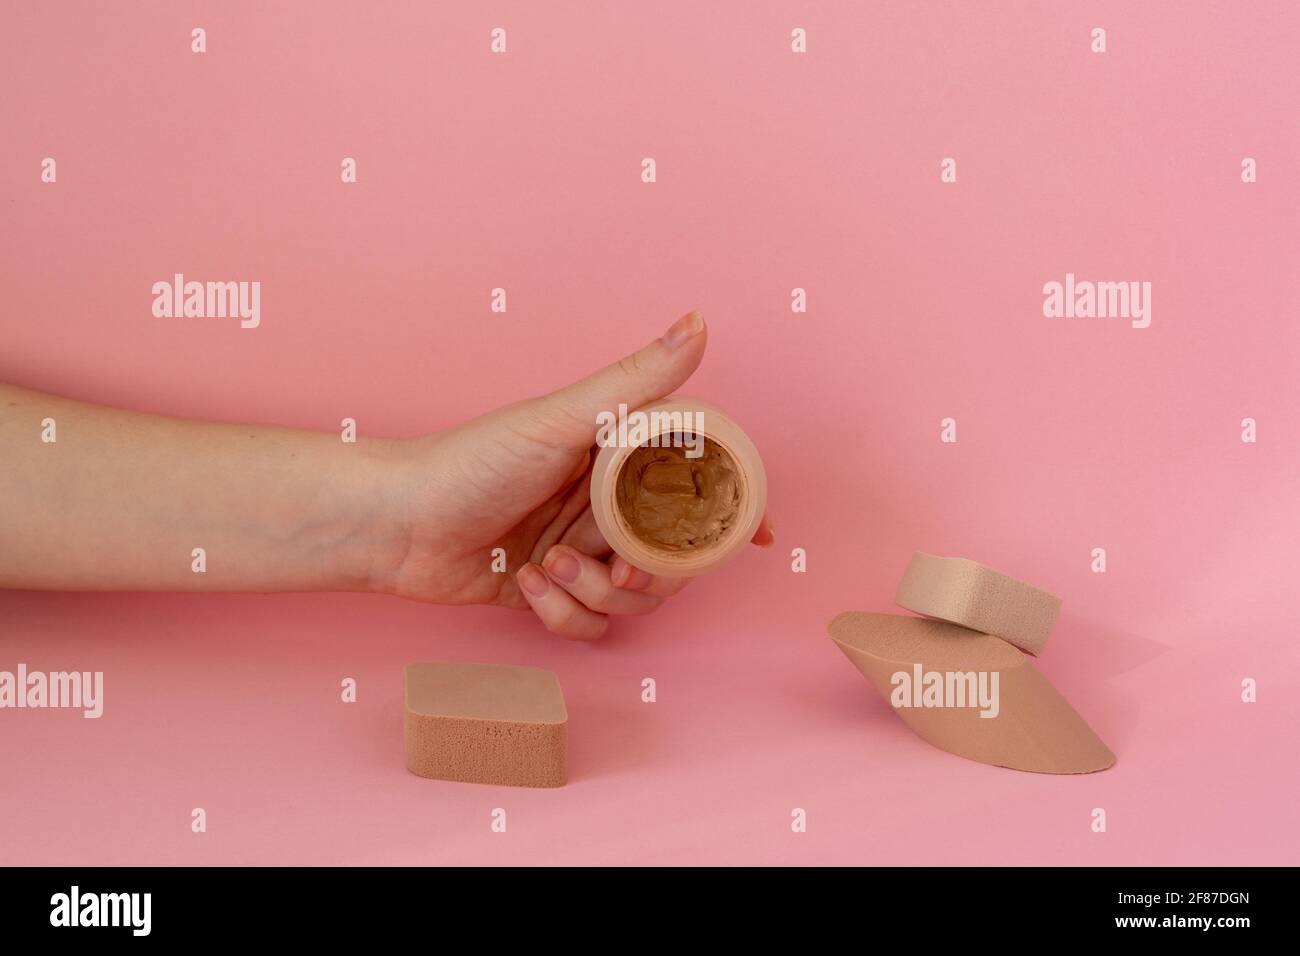 Powder makeup in a woman's hand, sponges for applying face powder on pink background Stock Photo